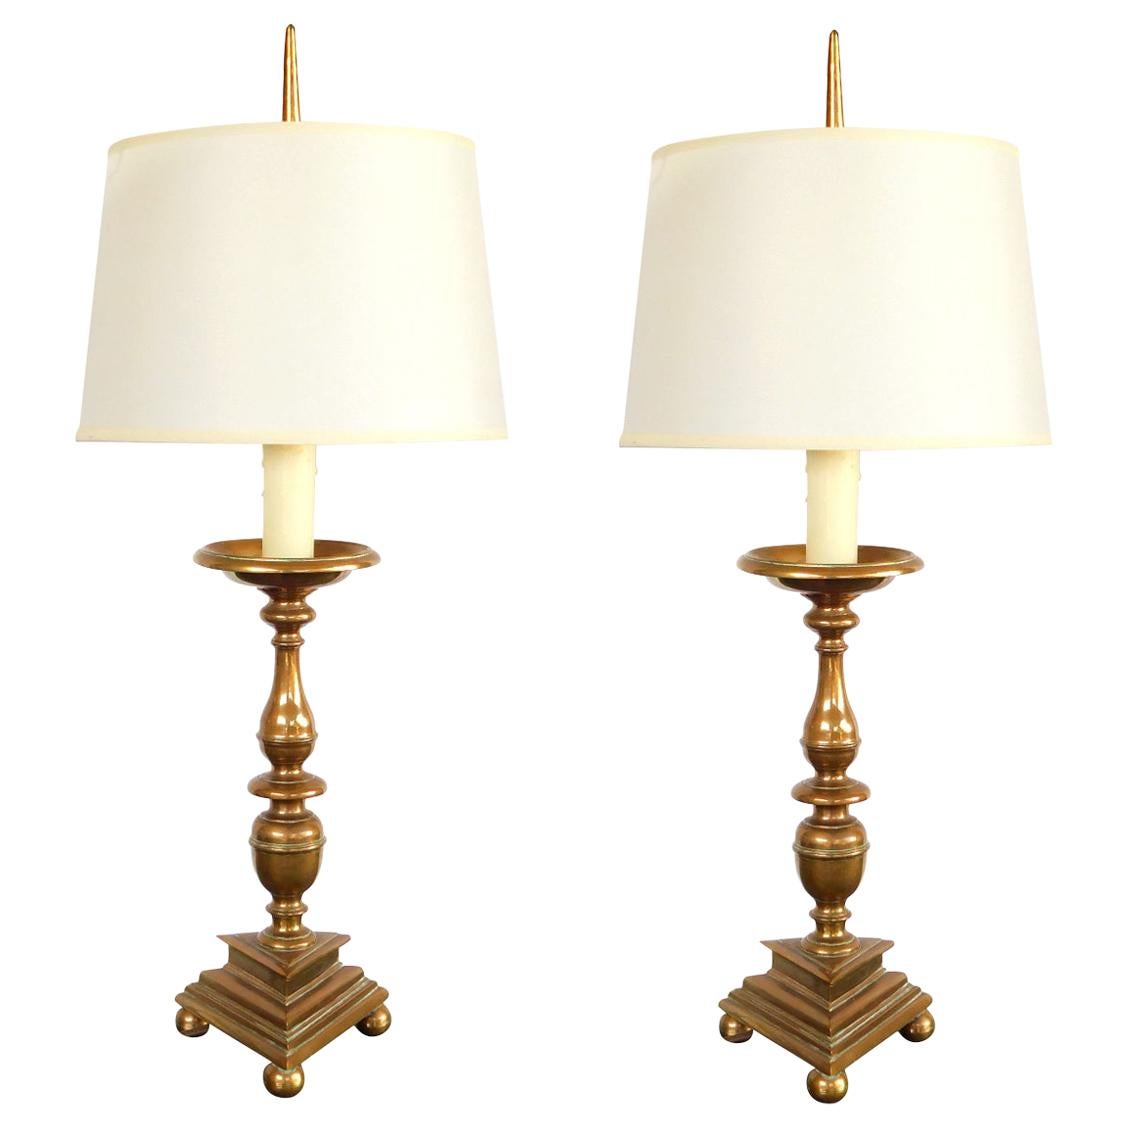 Pair of French Baroque Style Bronze Pricket Sticks Now Mounted as Lamps